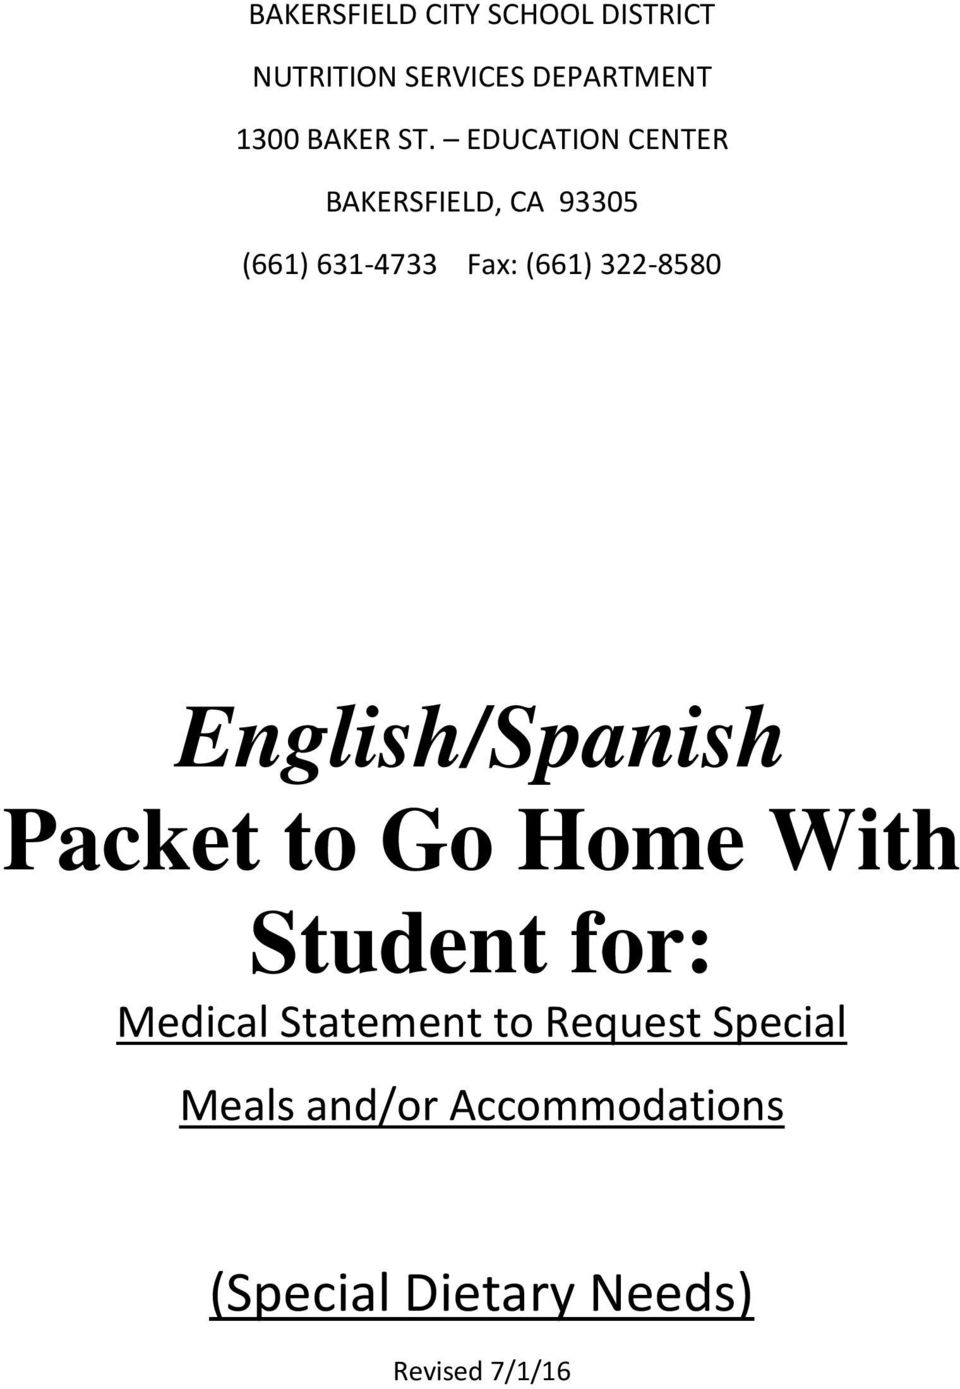 English/Spanish Packet to Go Home With Student for: Medical